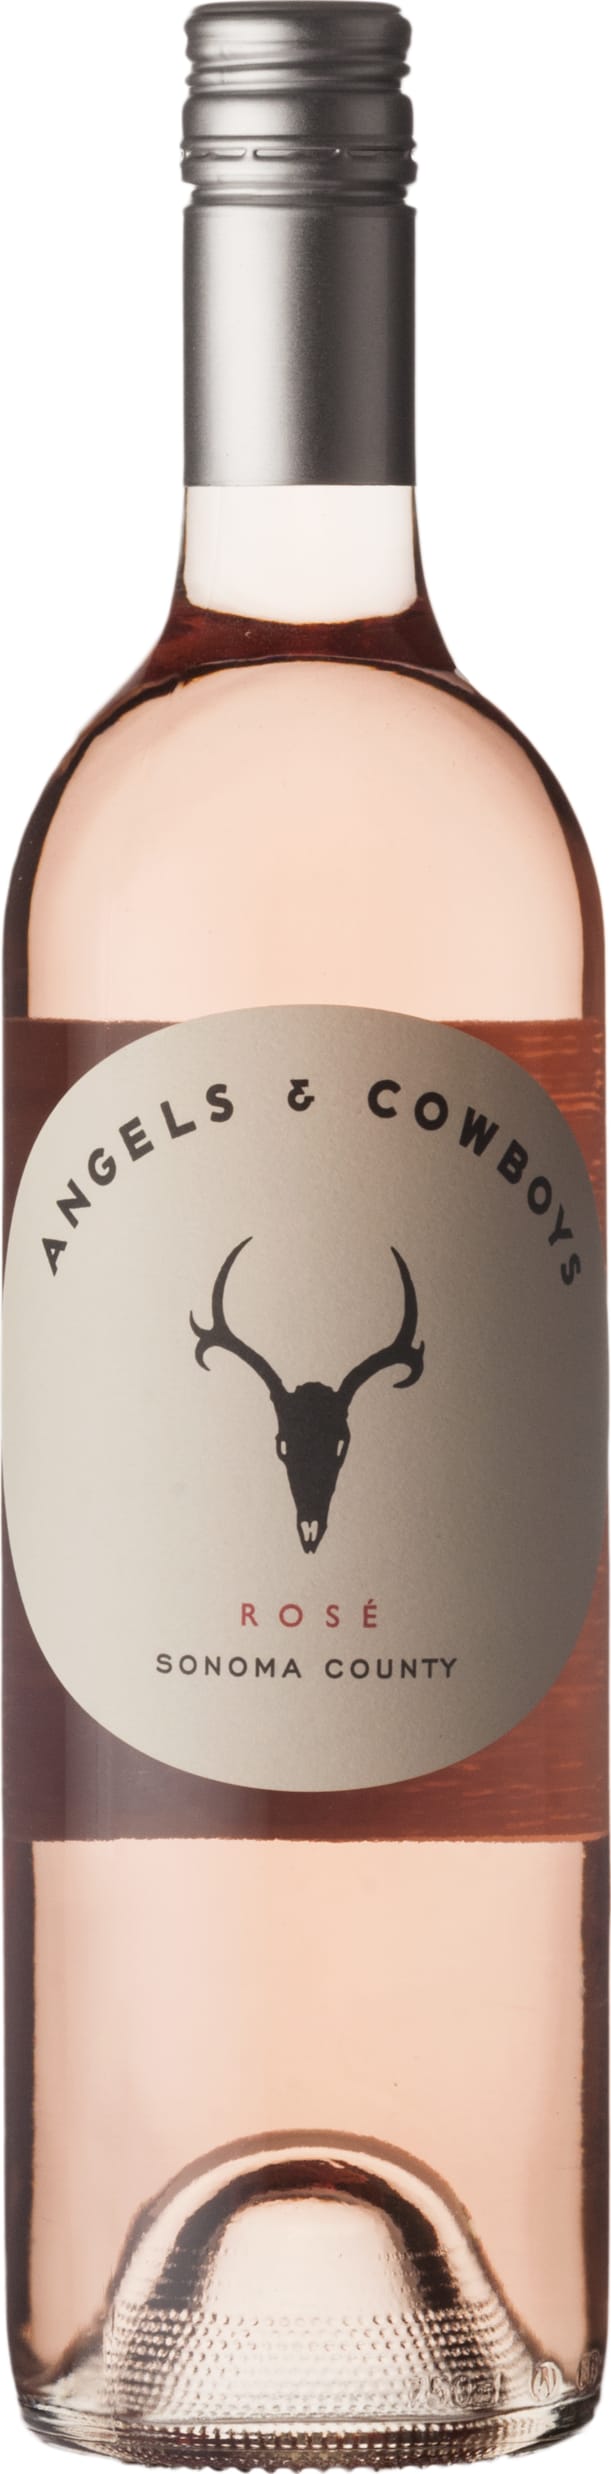 Angels and Cowboys Angels and Cowboys Rose 2022 75cl - Buy Angels and Cowboys Wines from GREAT WINES DIRECT wine shop